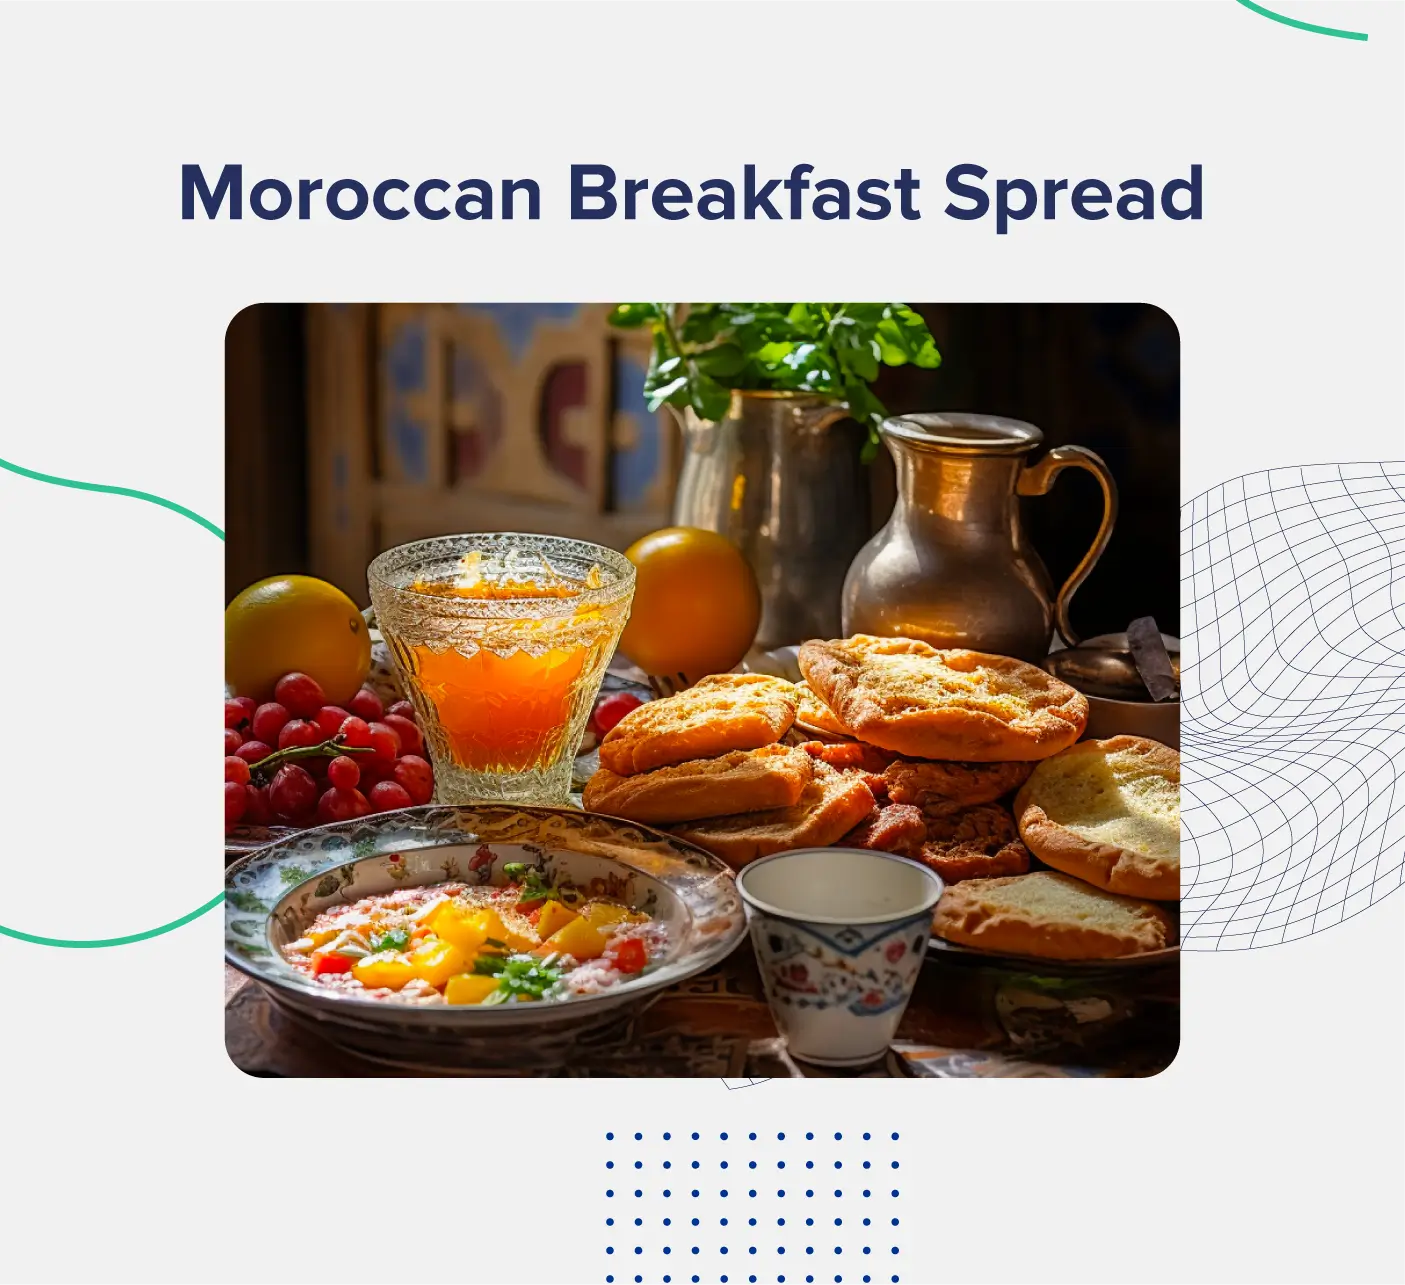 A graphic entitled "Moroccan Breakfast Spread" featuring an image of several dishes, including tea, bread, a pureed dip known as amlou, and more.